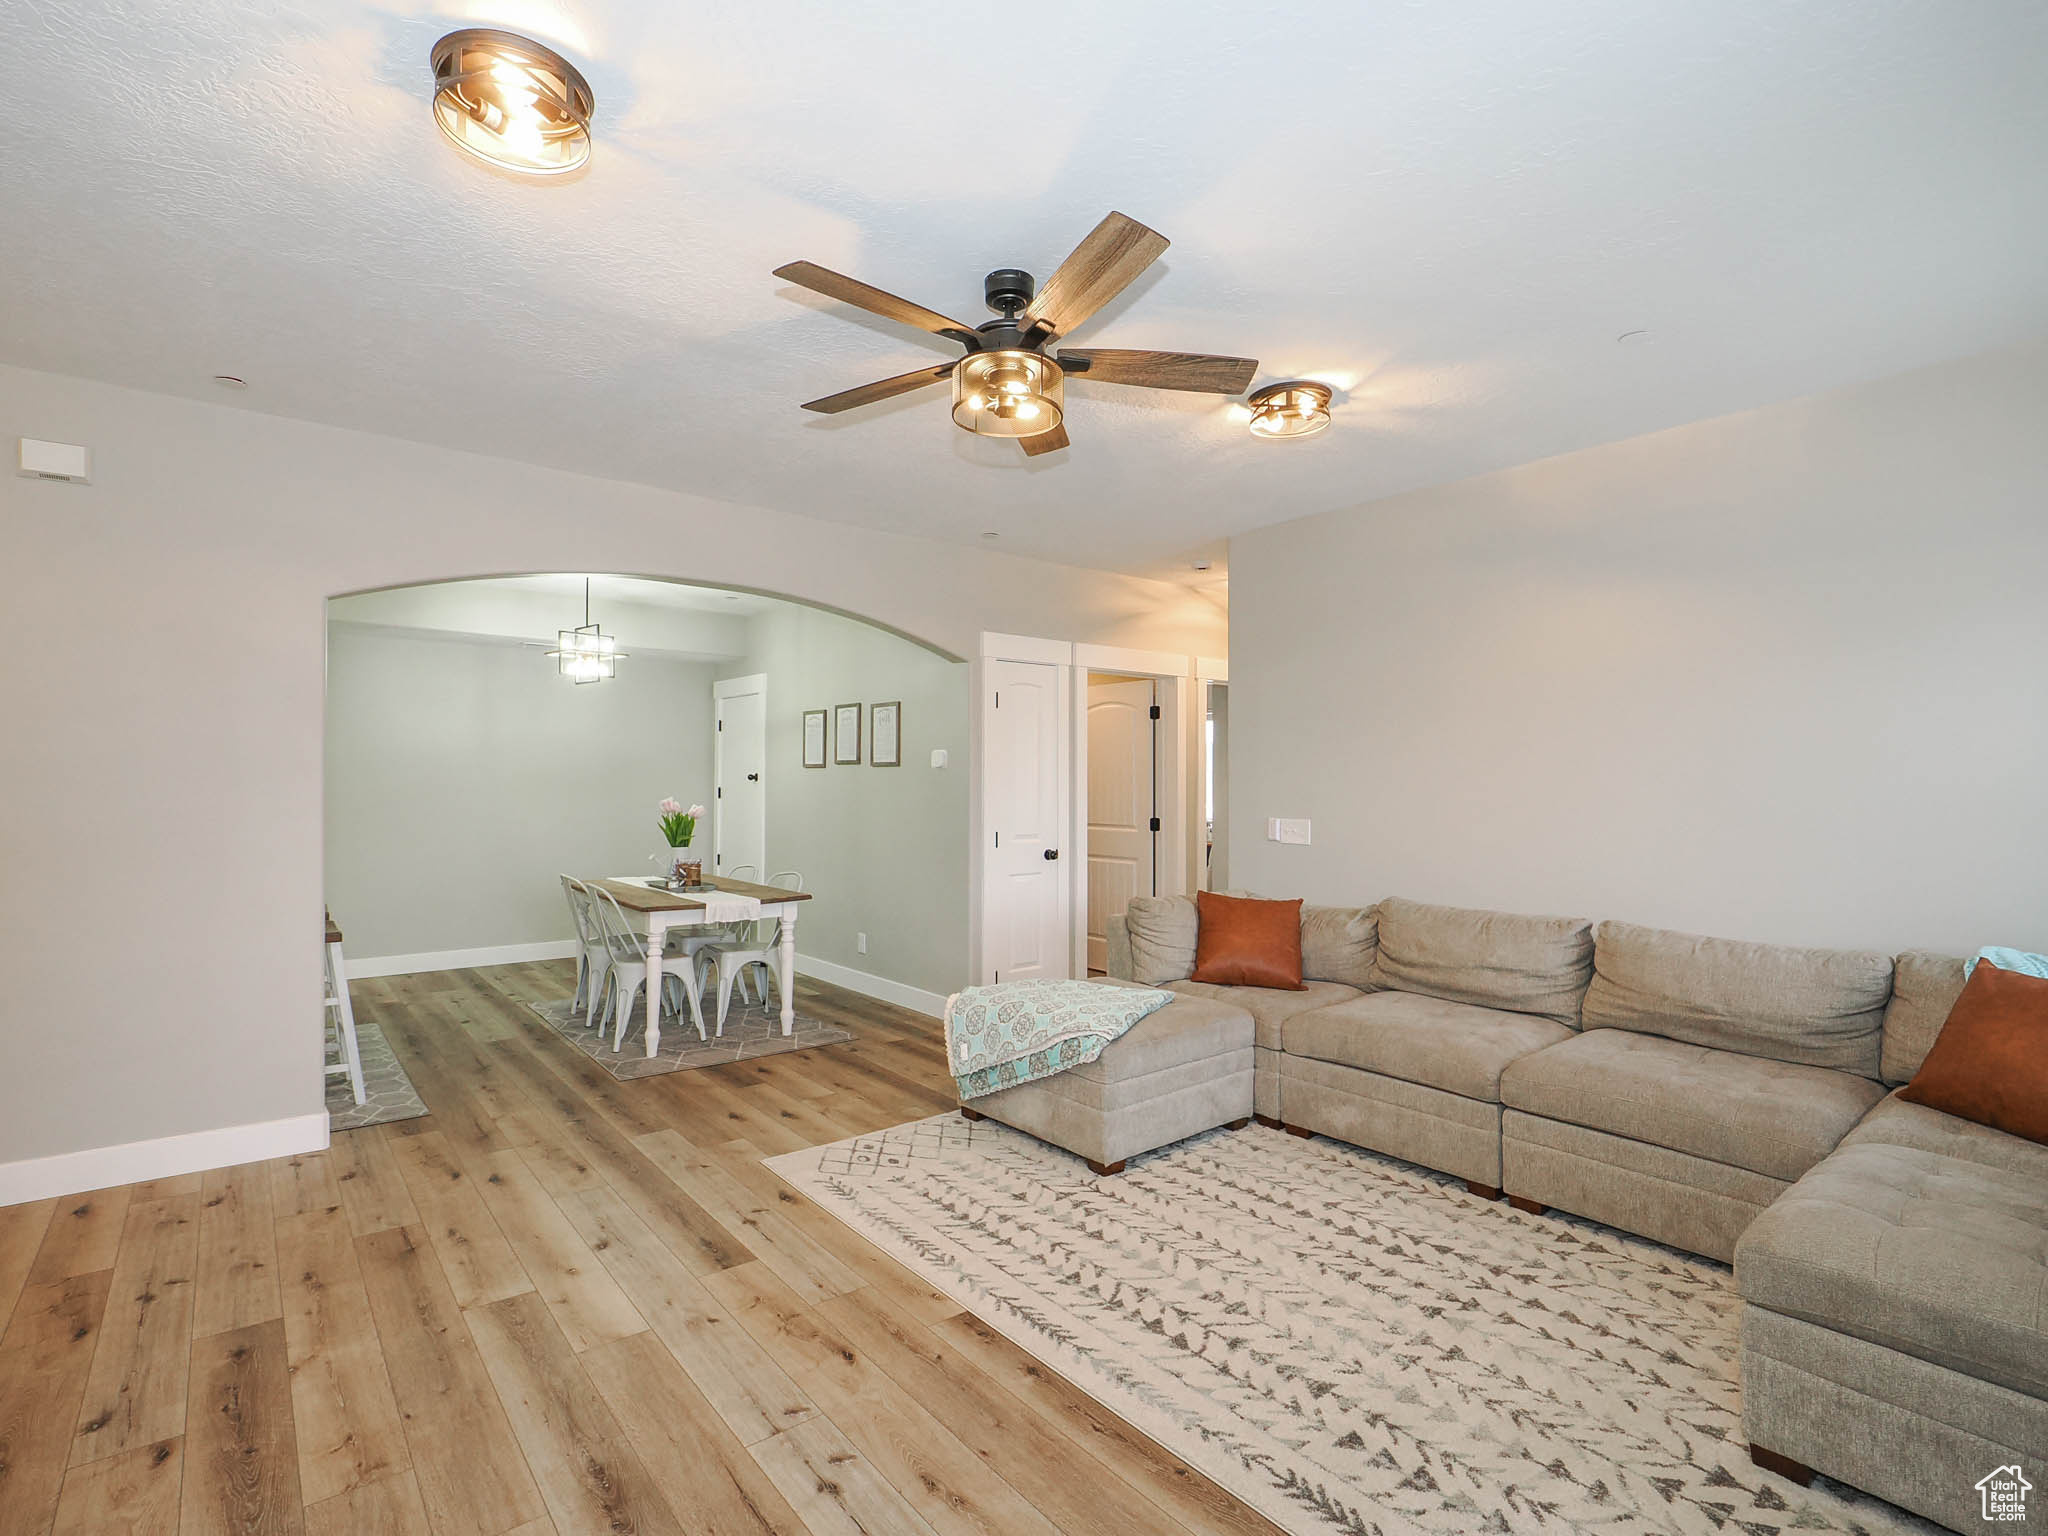 Unfurnished living room featuring light wood-type flooring and ceiling fan